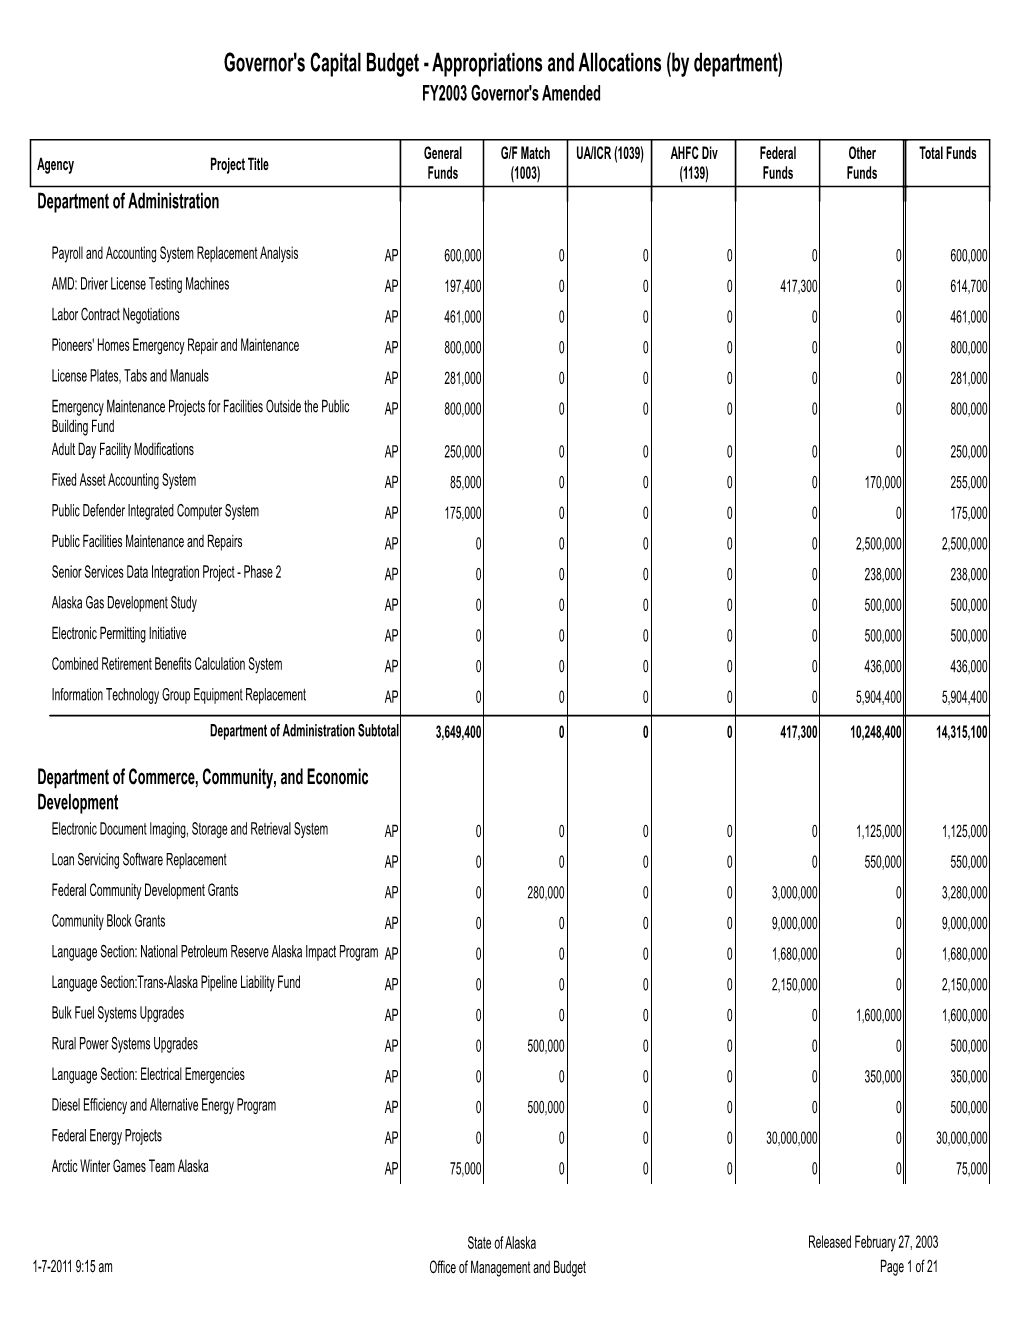 Governor's Capital Budget - Appropriations and Allocations (By Department) FY2003 Governor's Amended